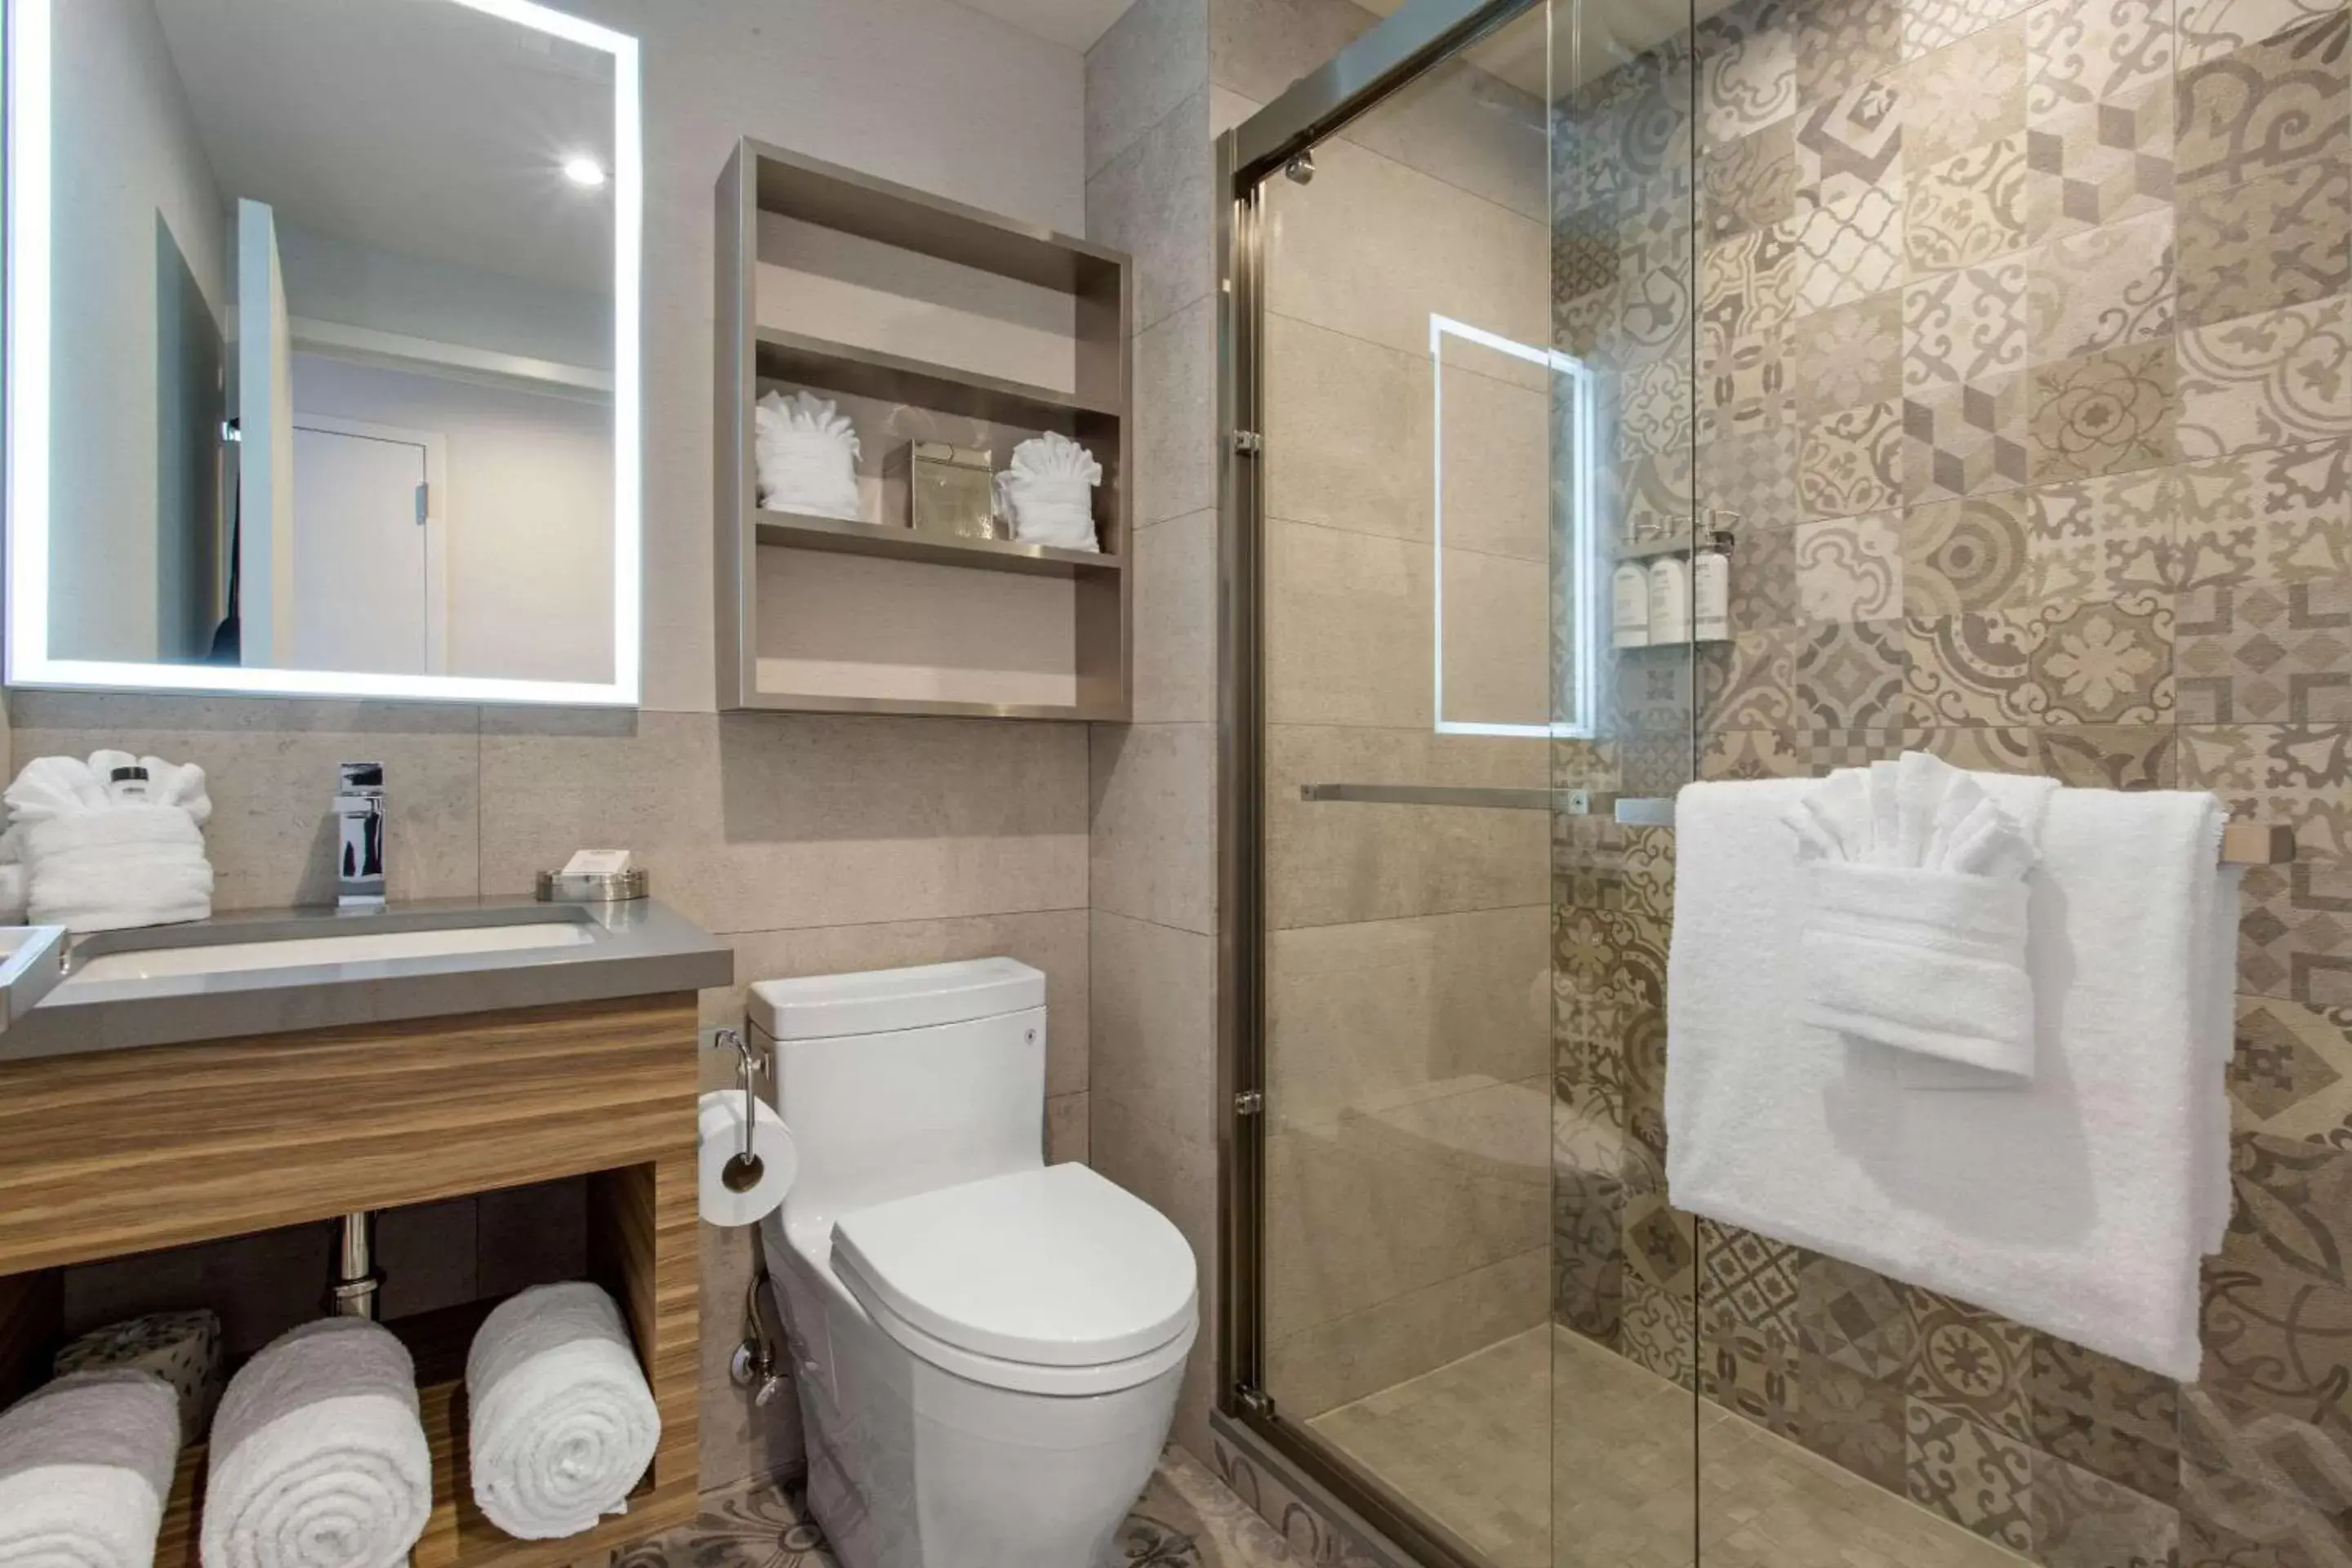 Bathroom in Insignia Hotel, Ascend Hotel Collection